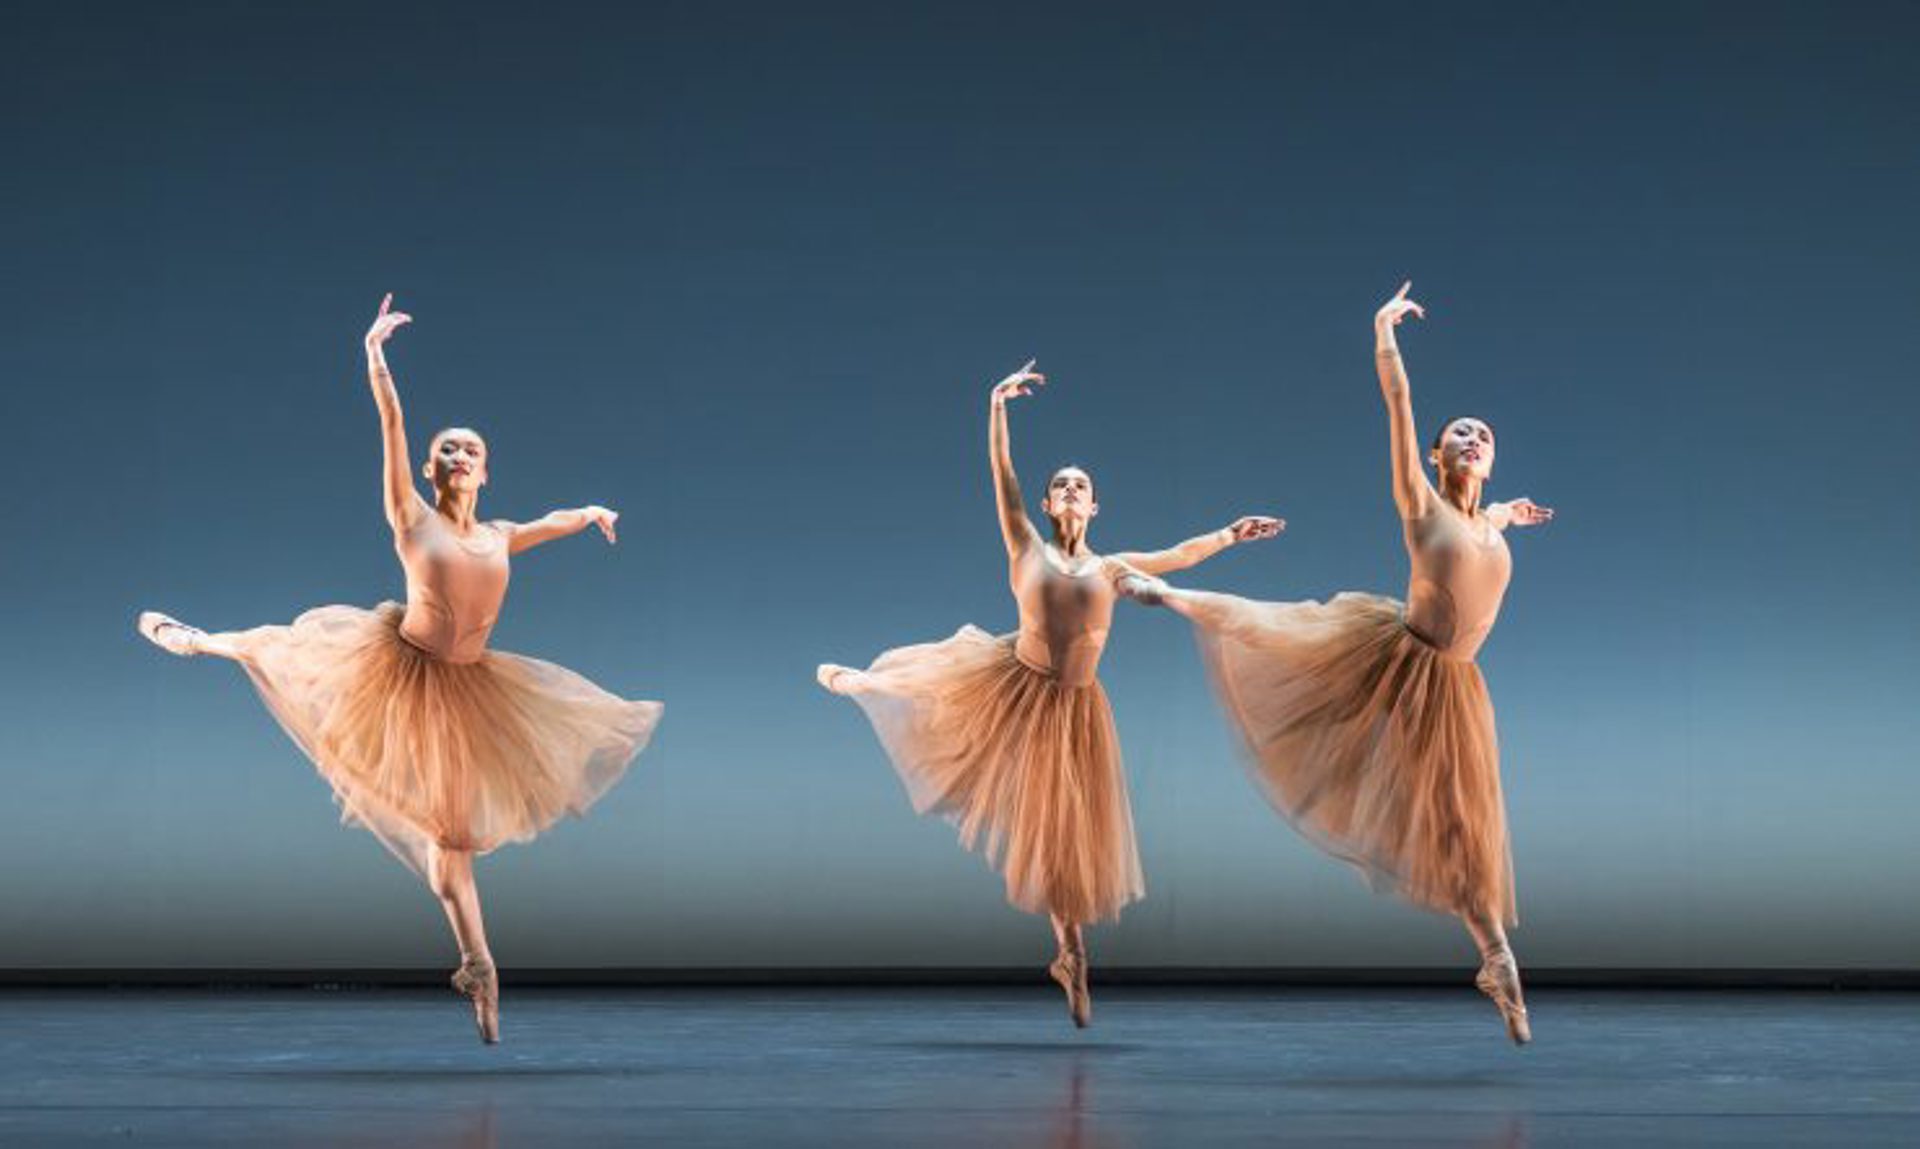 Three female ballet dancers wearing nude leotards and long tutus in a jumping arabesque with both arms high on blue stage